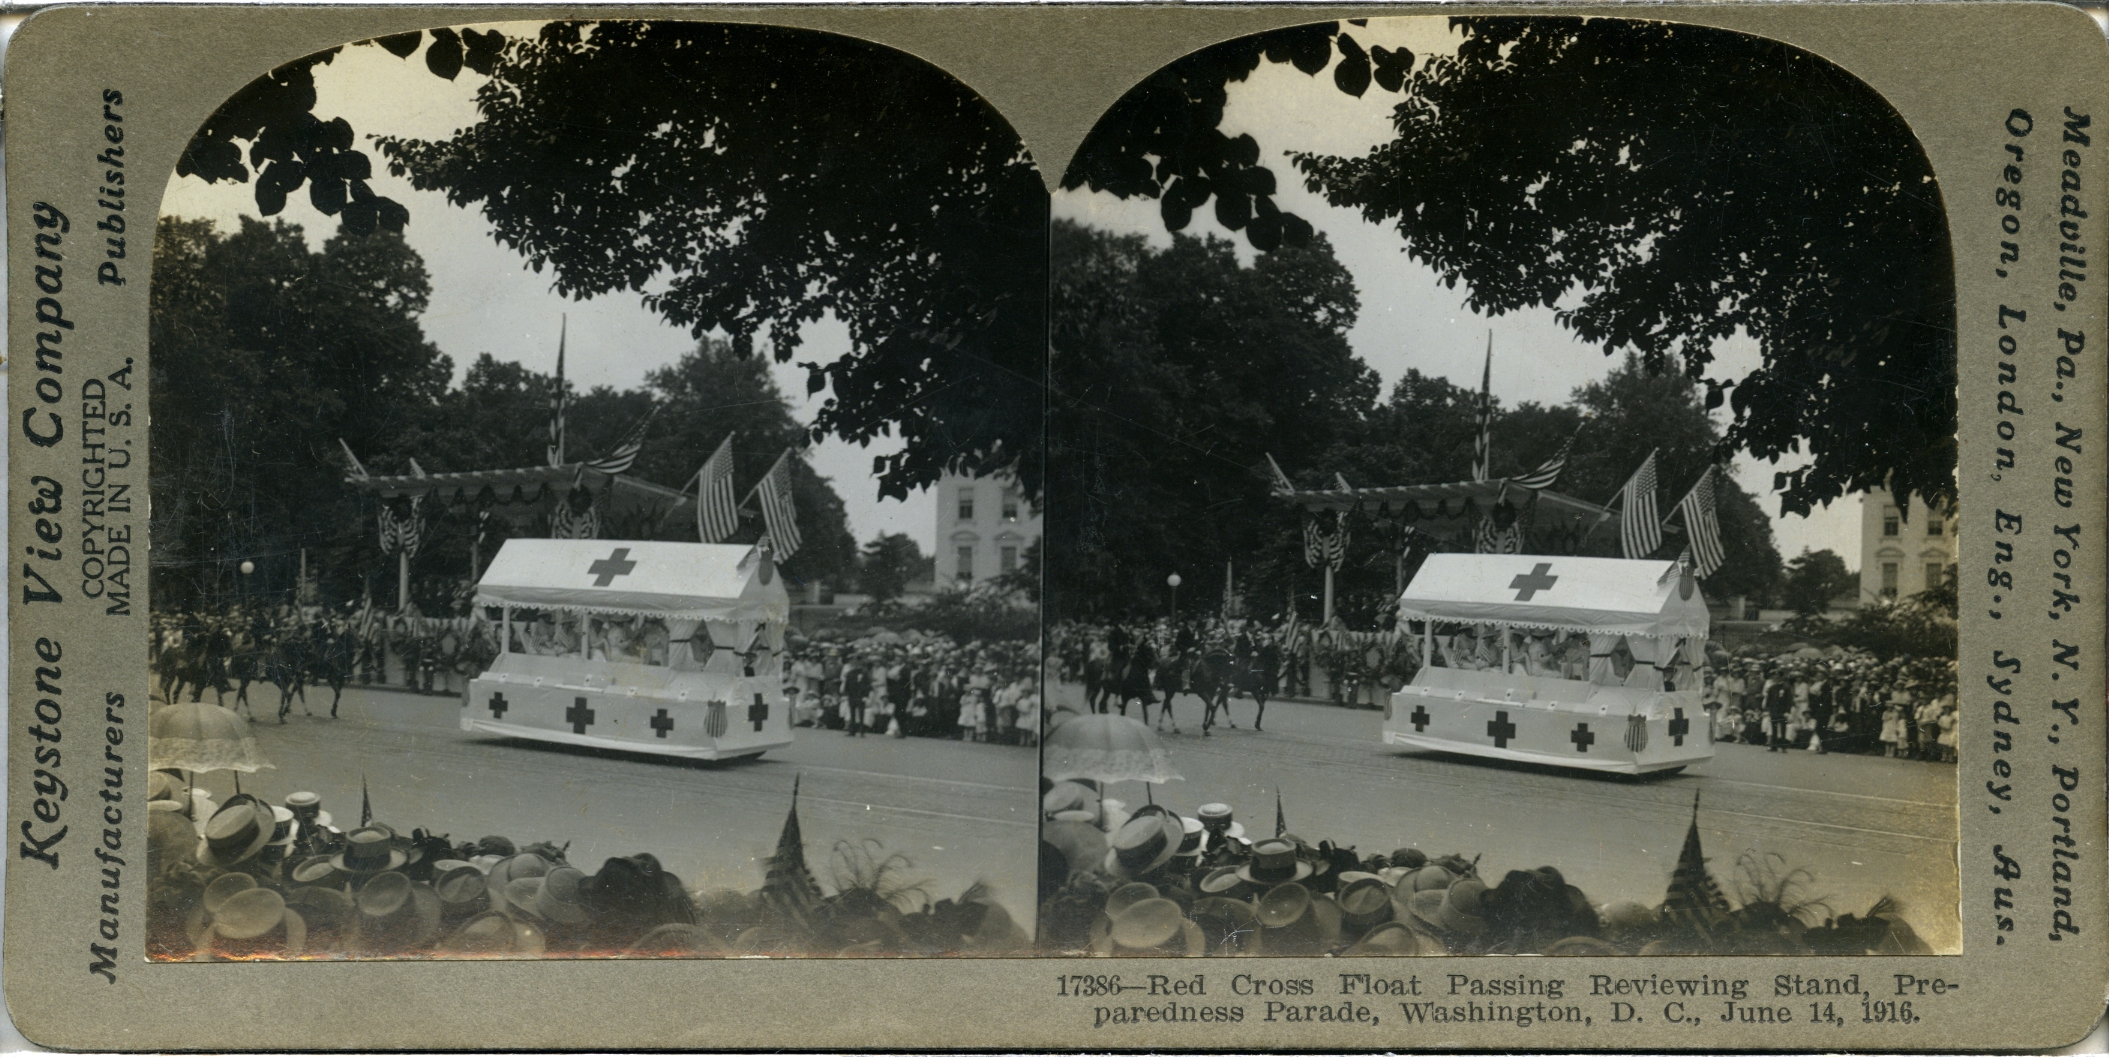 Red Cross Float passing Reviewing Stand, Preparedness Parade, Washington, D.C. June 14th, 1916